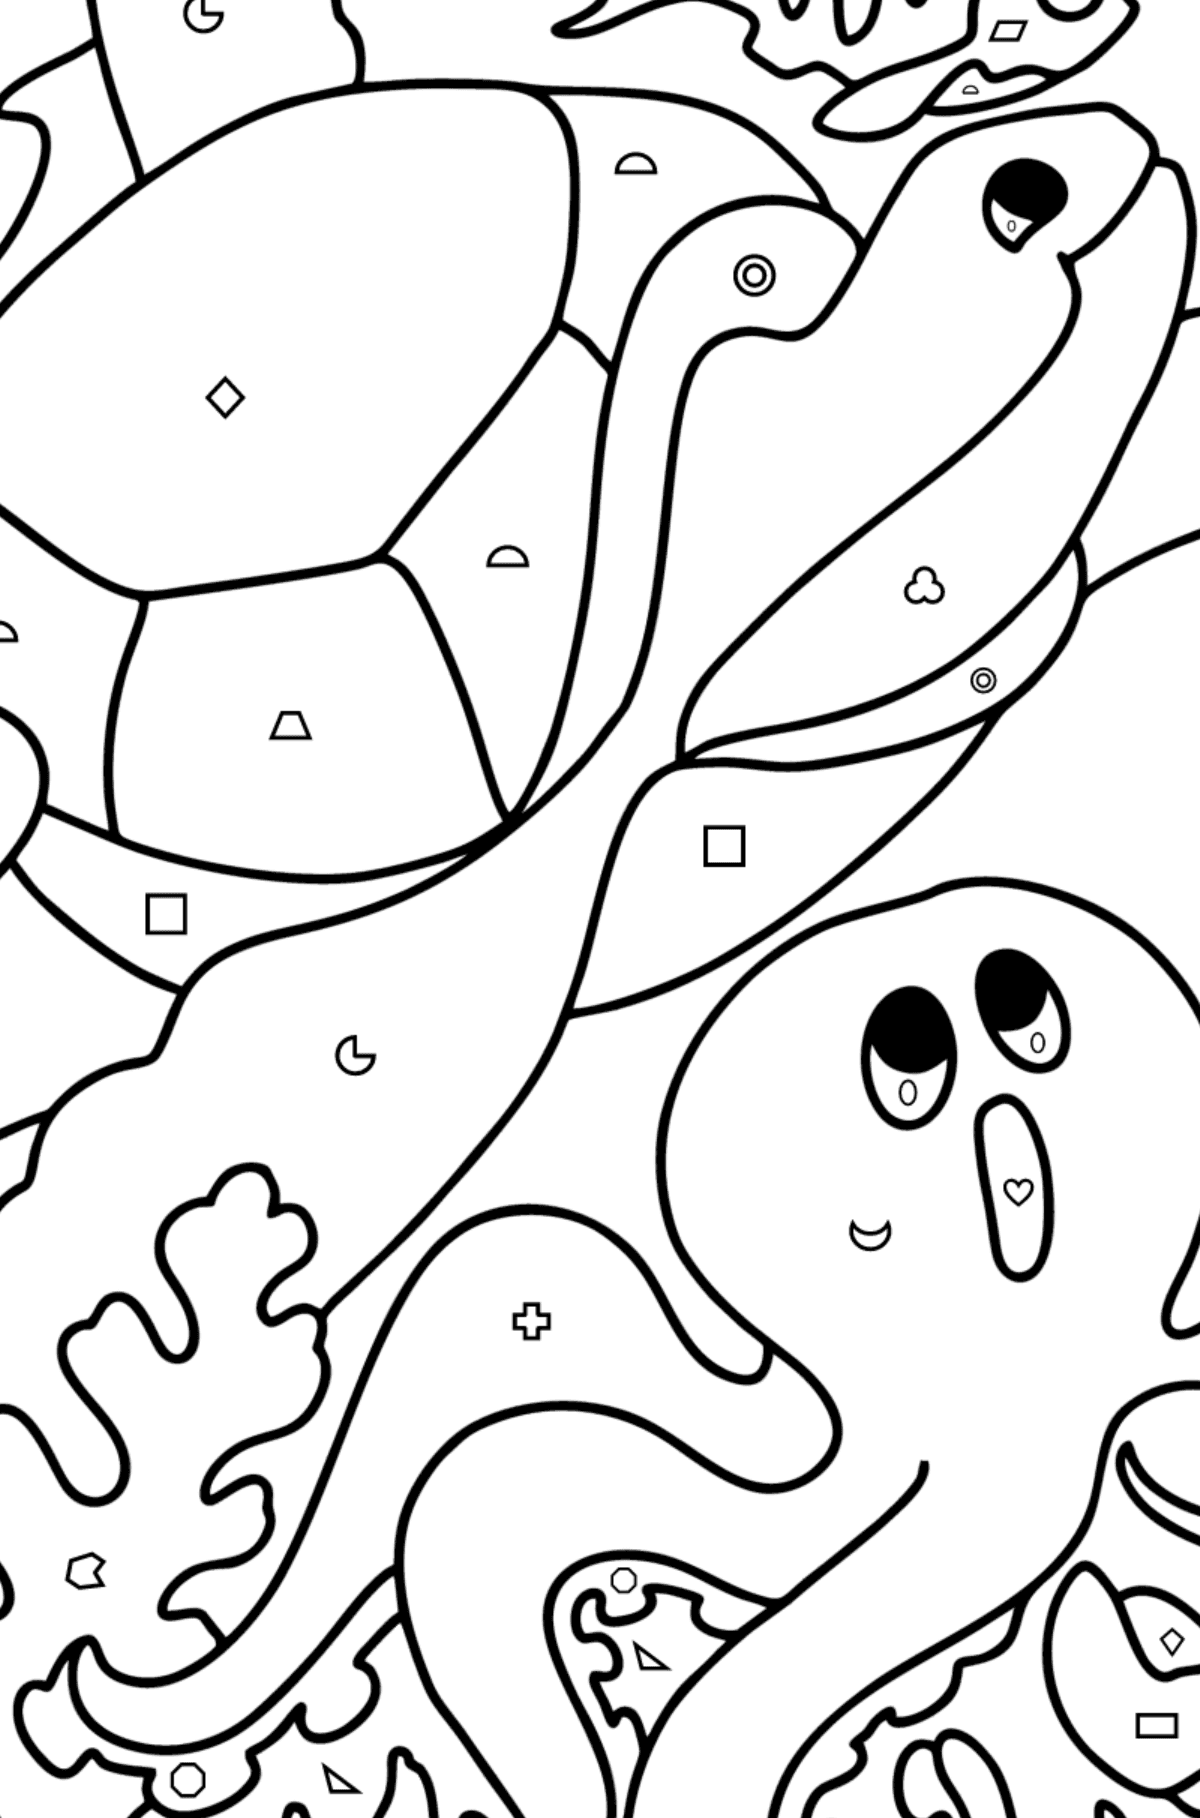 Fish, Turtle, Crab and Octopus coloring page - Coloring by Geometric Shapes for Kids